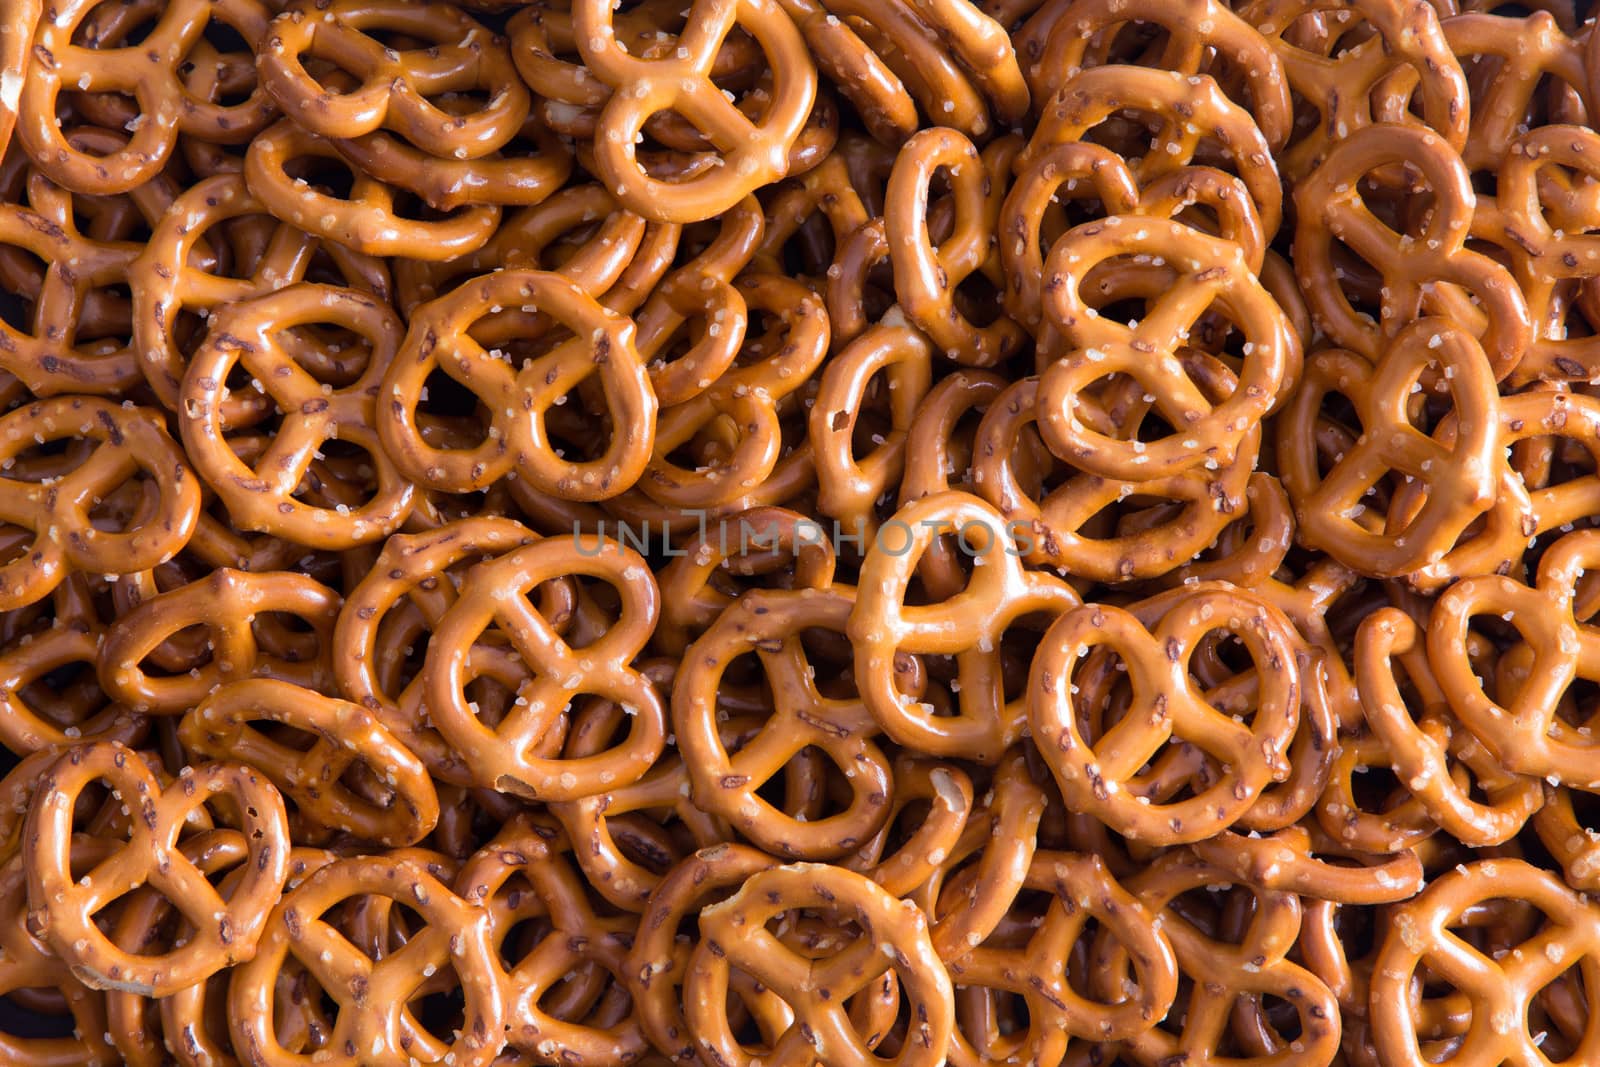 Background texture of salted savory mini pretzels in the traditional looped knot shape in a random heap viewed full frame from overhead